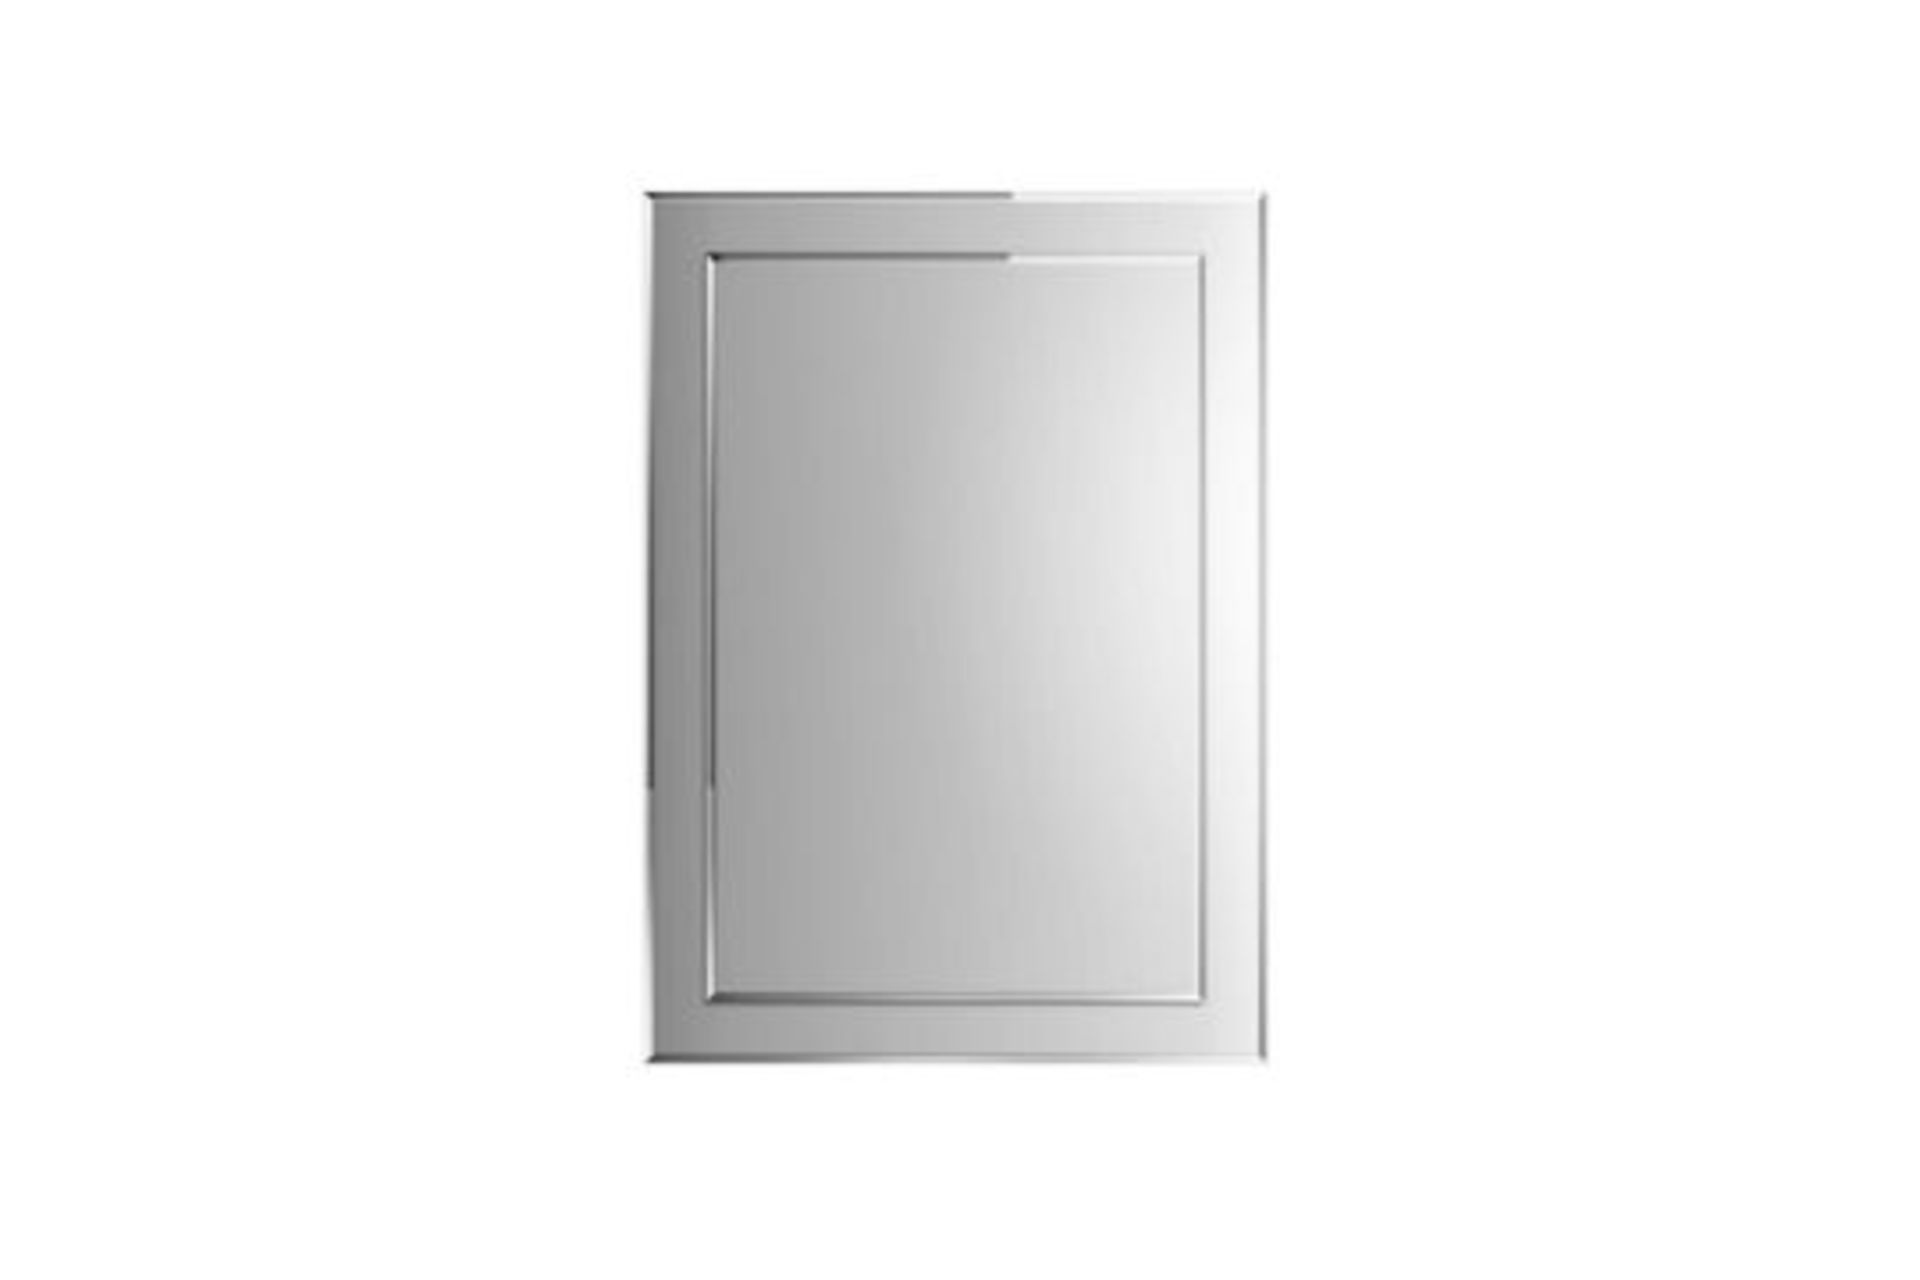 NEW & BOXED 500x700mm Bevel Mirror . Comes fully assembled for added convenience Versatile with... - Image 2 of 2